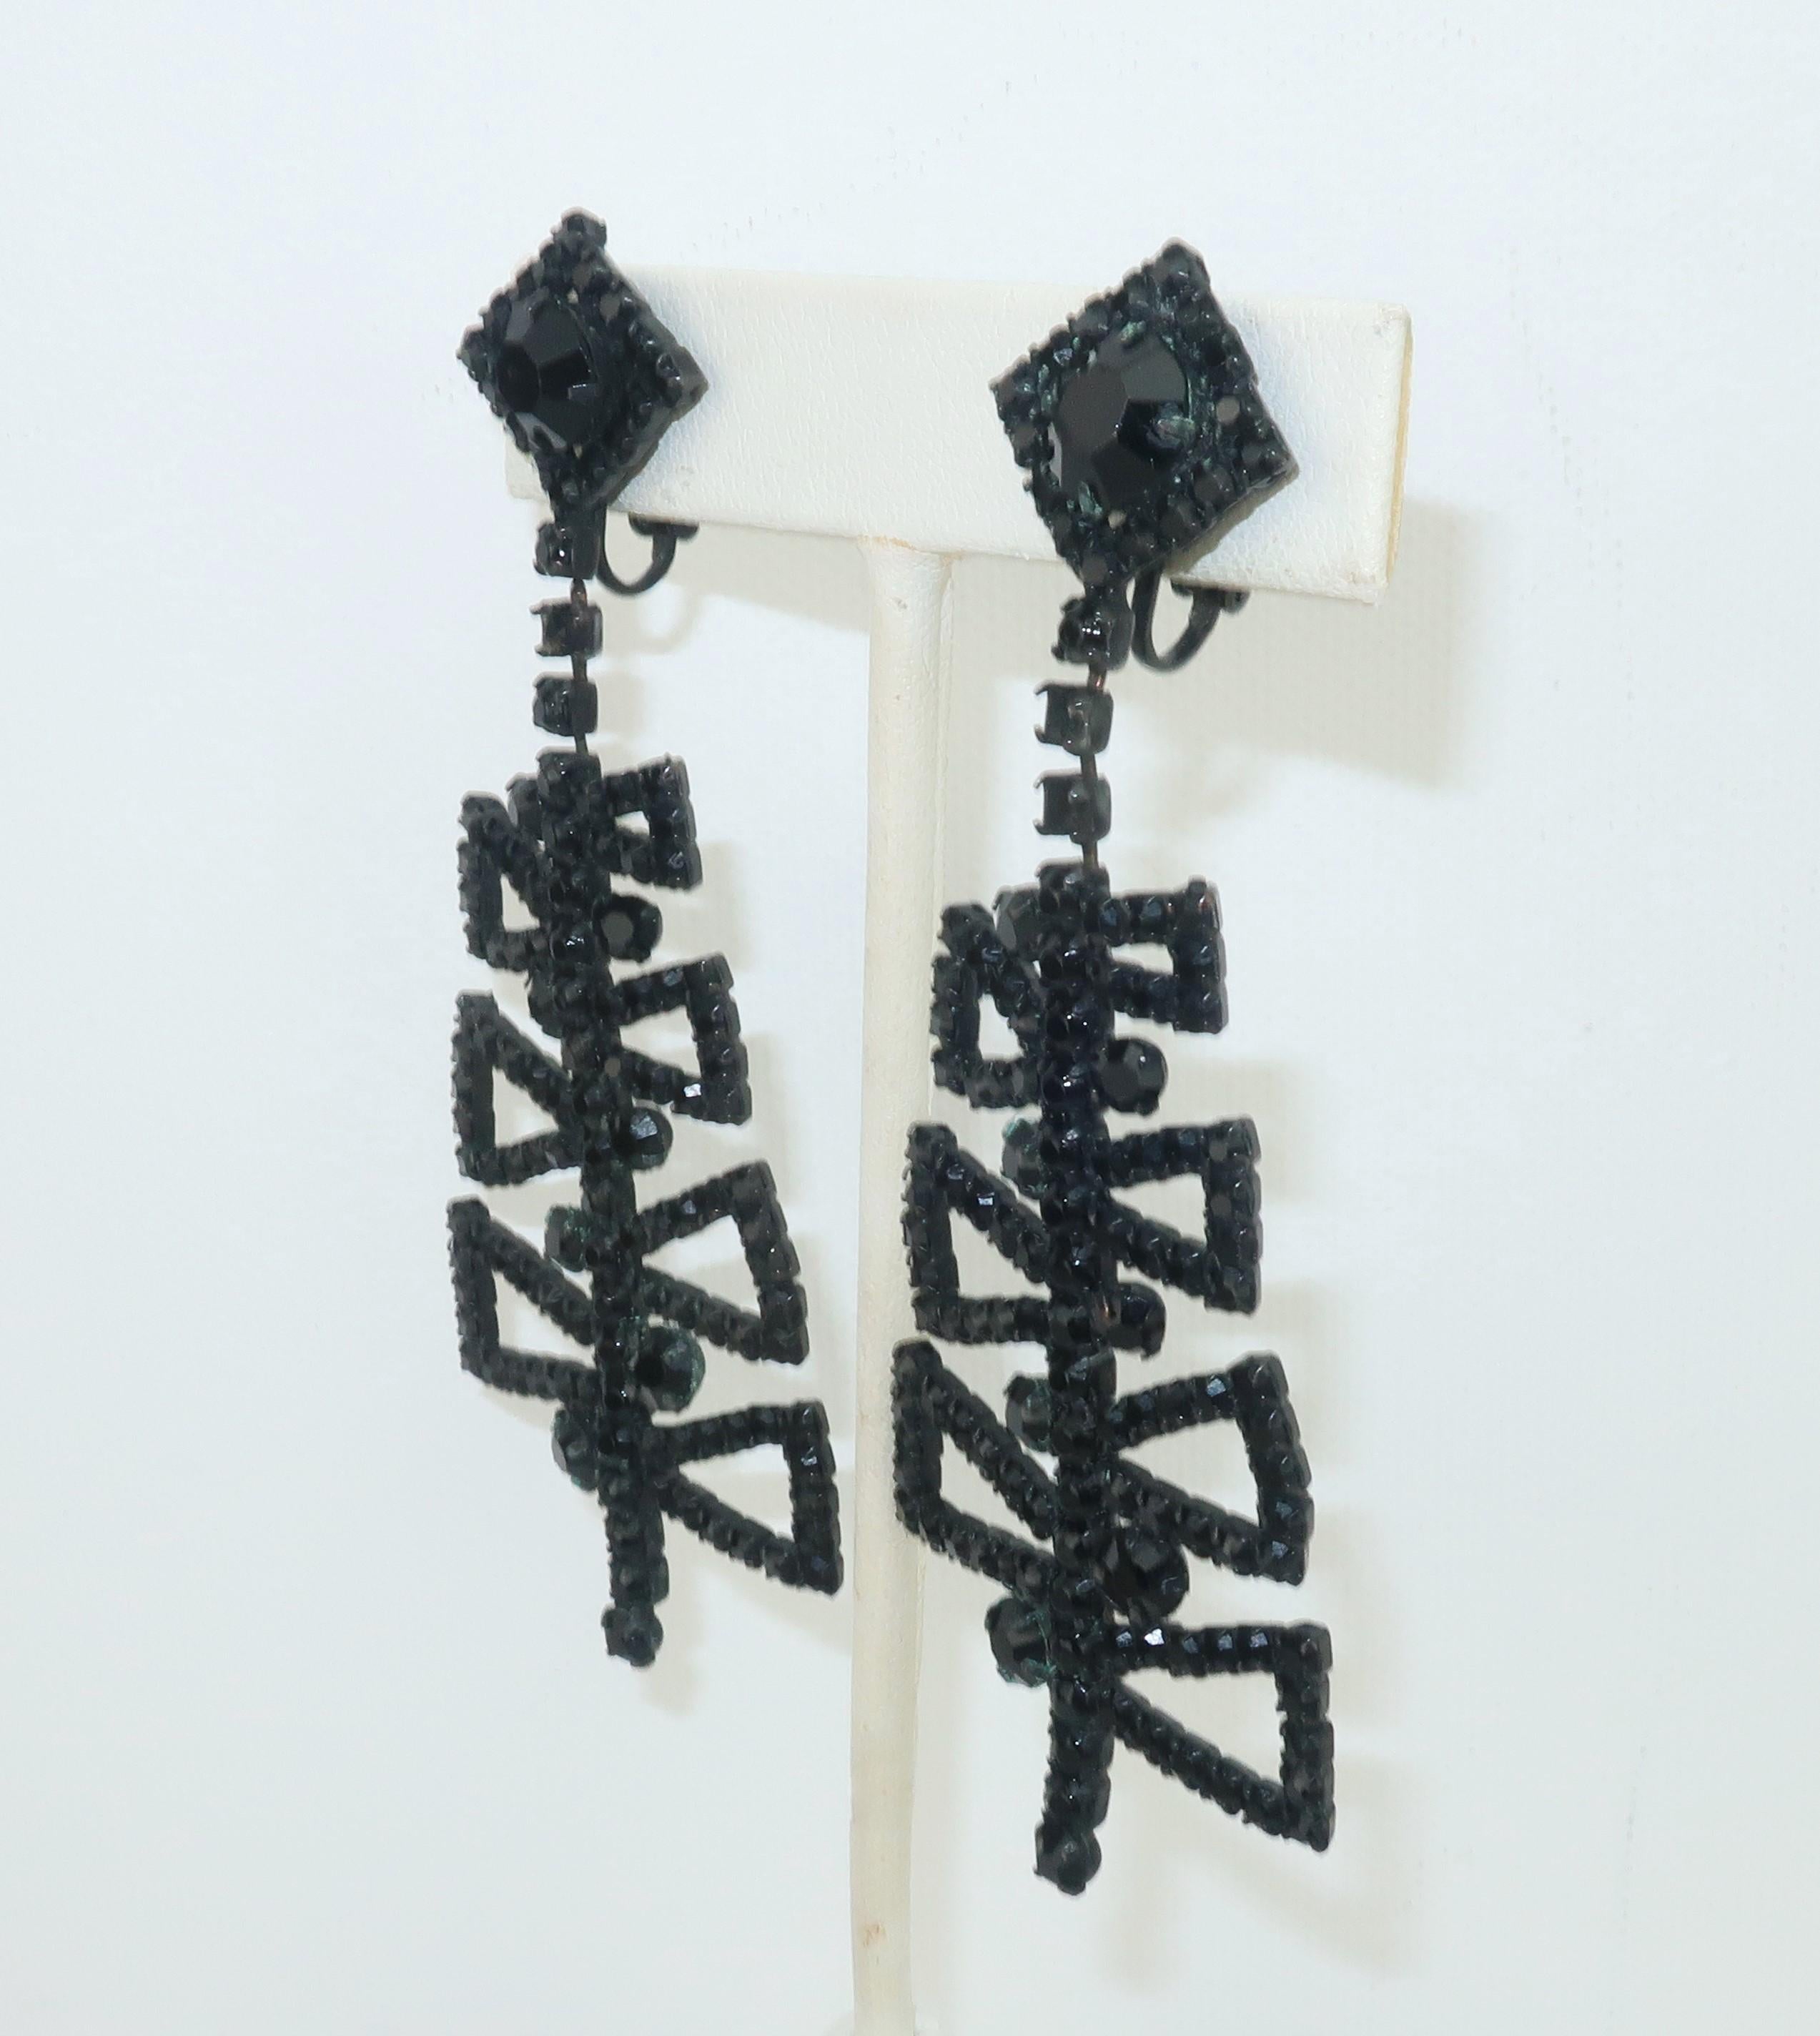 1960's Weiss screw back clip on dangle earrings with a mod geometric design in faceted black rhinestones and a black metal setting.  The perfect mod accessory for a period perfect look!
CONDITION
The earrings are in good to fair condition with three